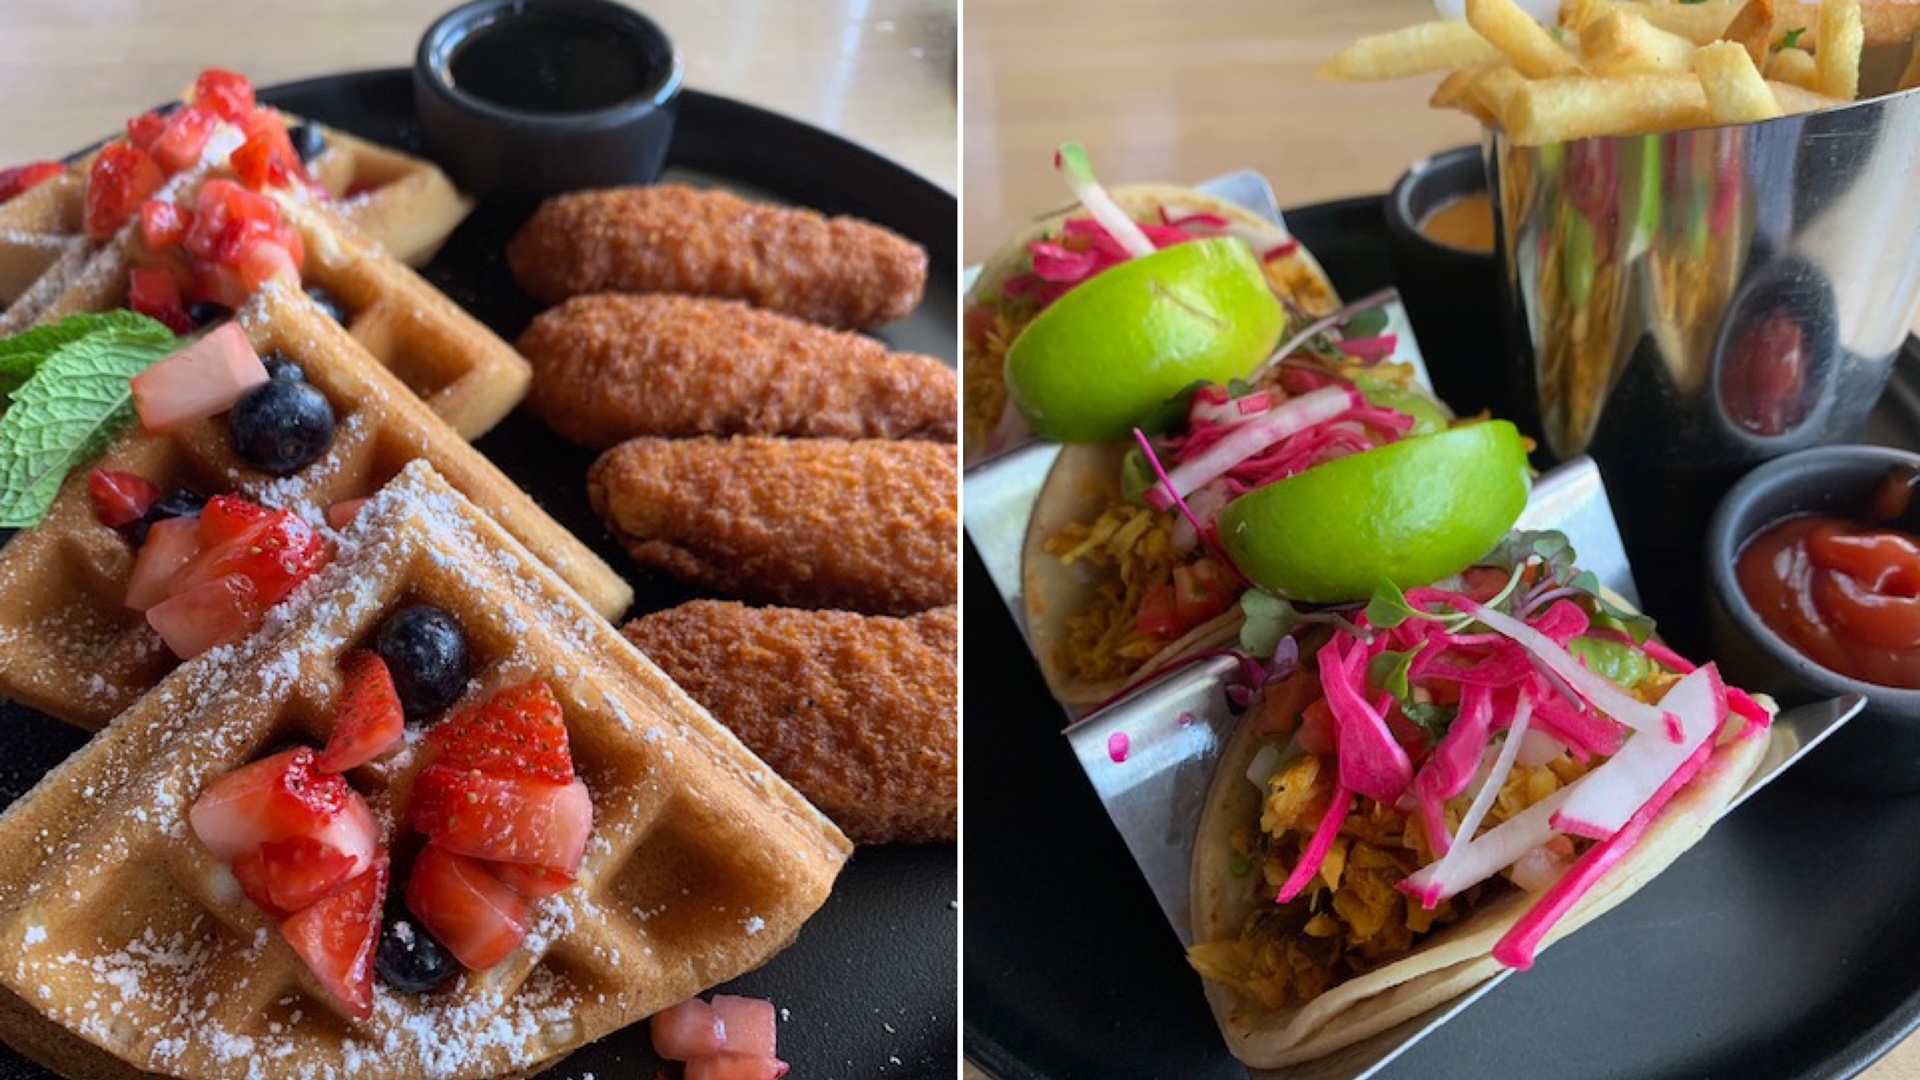 A photo of the Vegan Breakfast Tacos and Vegan Chicken & Waffles from Stache.